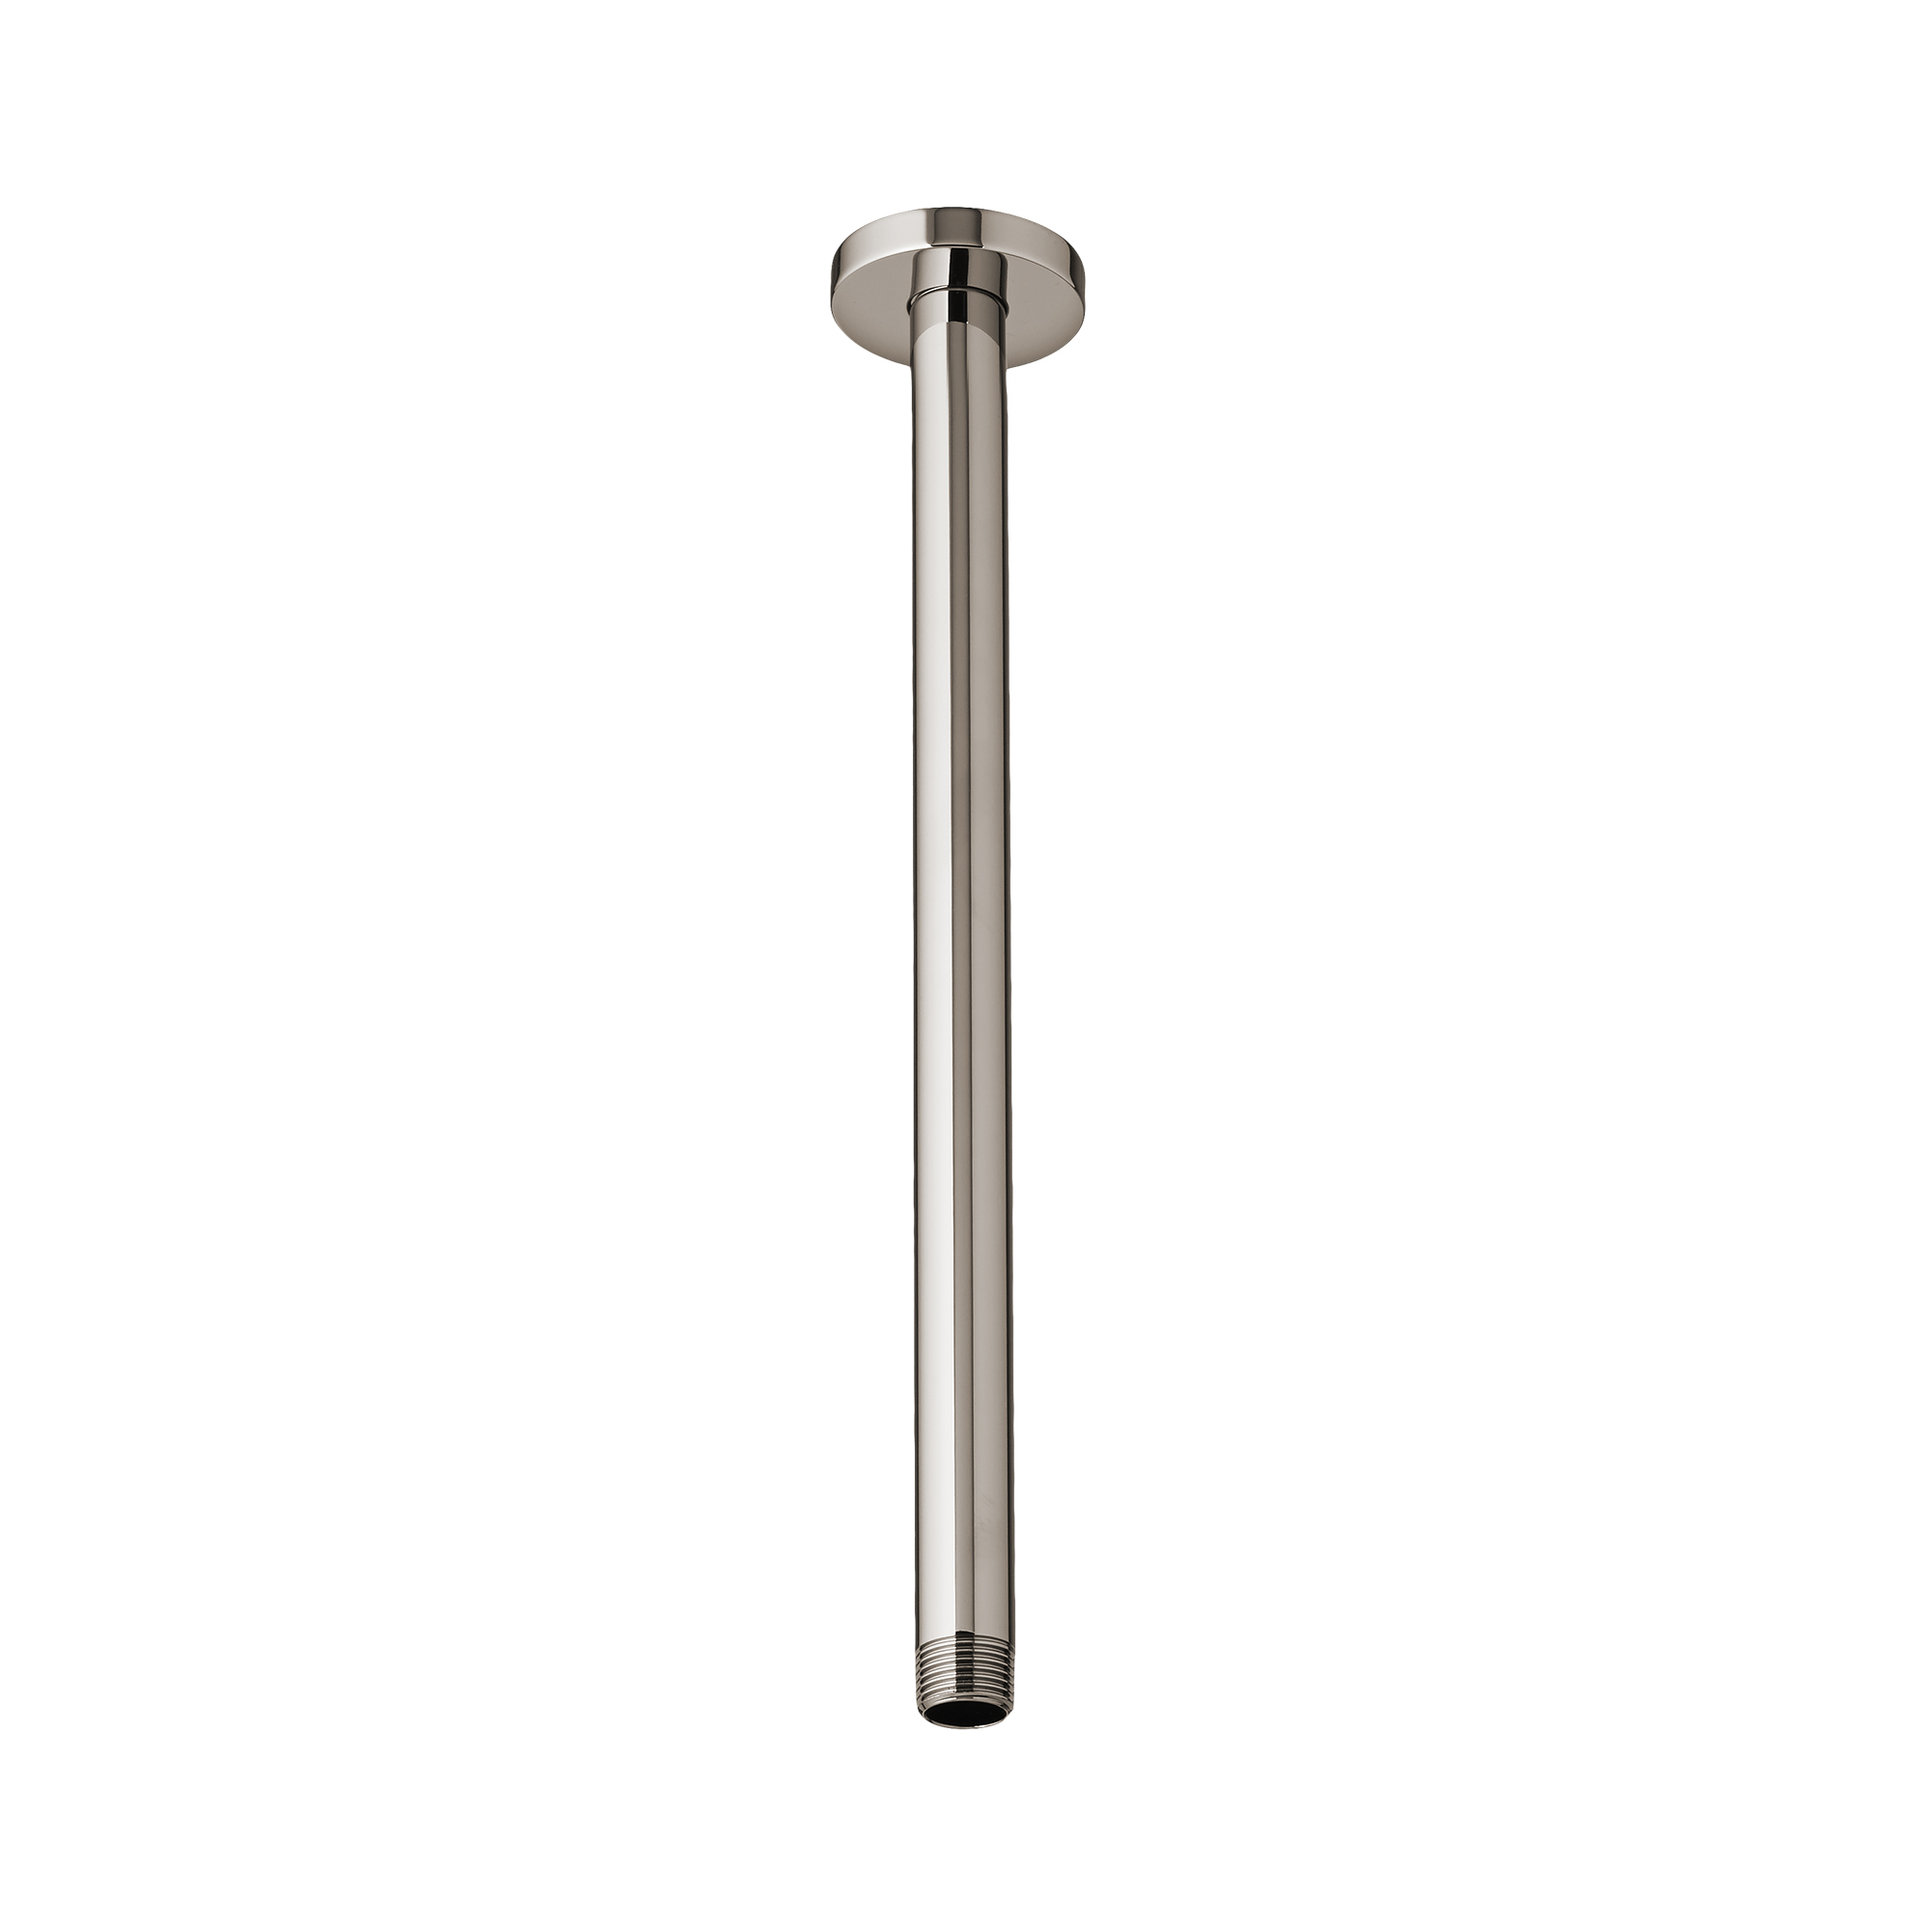 Contemporary Ceiling Mount 12 in. Shower Arm